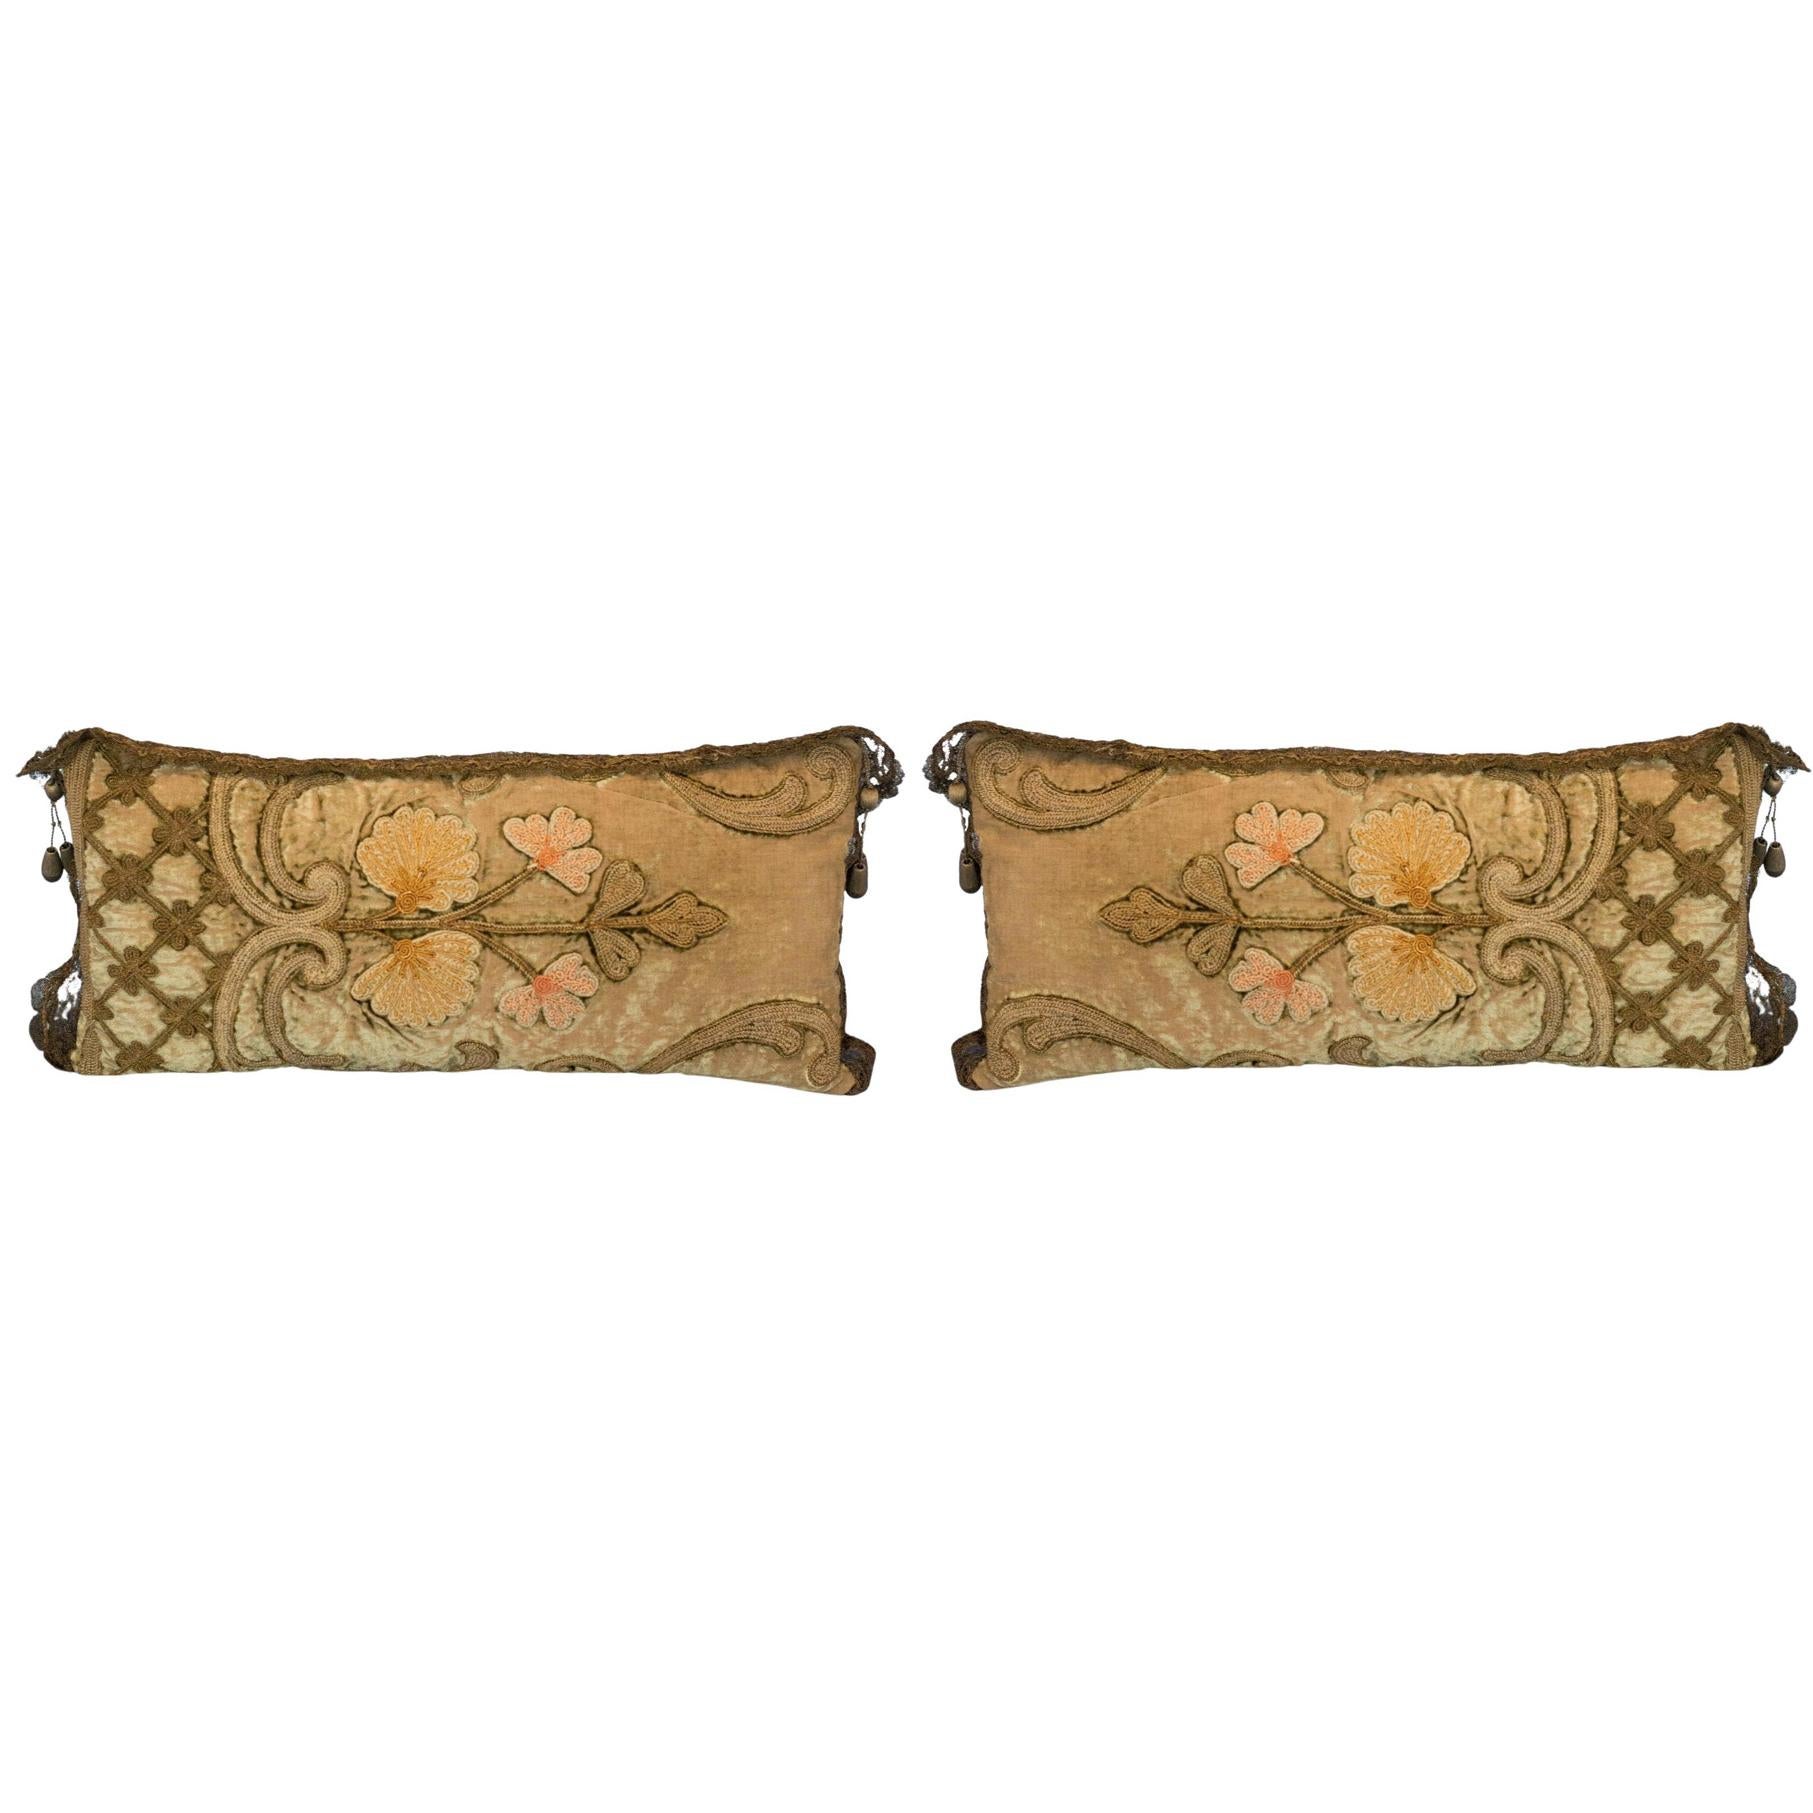 Pair of Contemporary Ornately Embroidered Ottoman Pillows For Sale